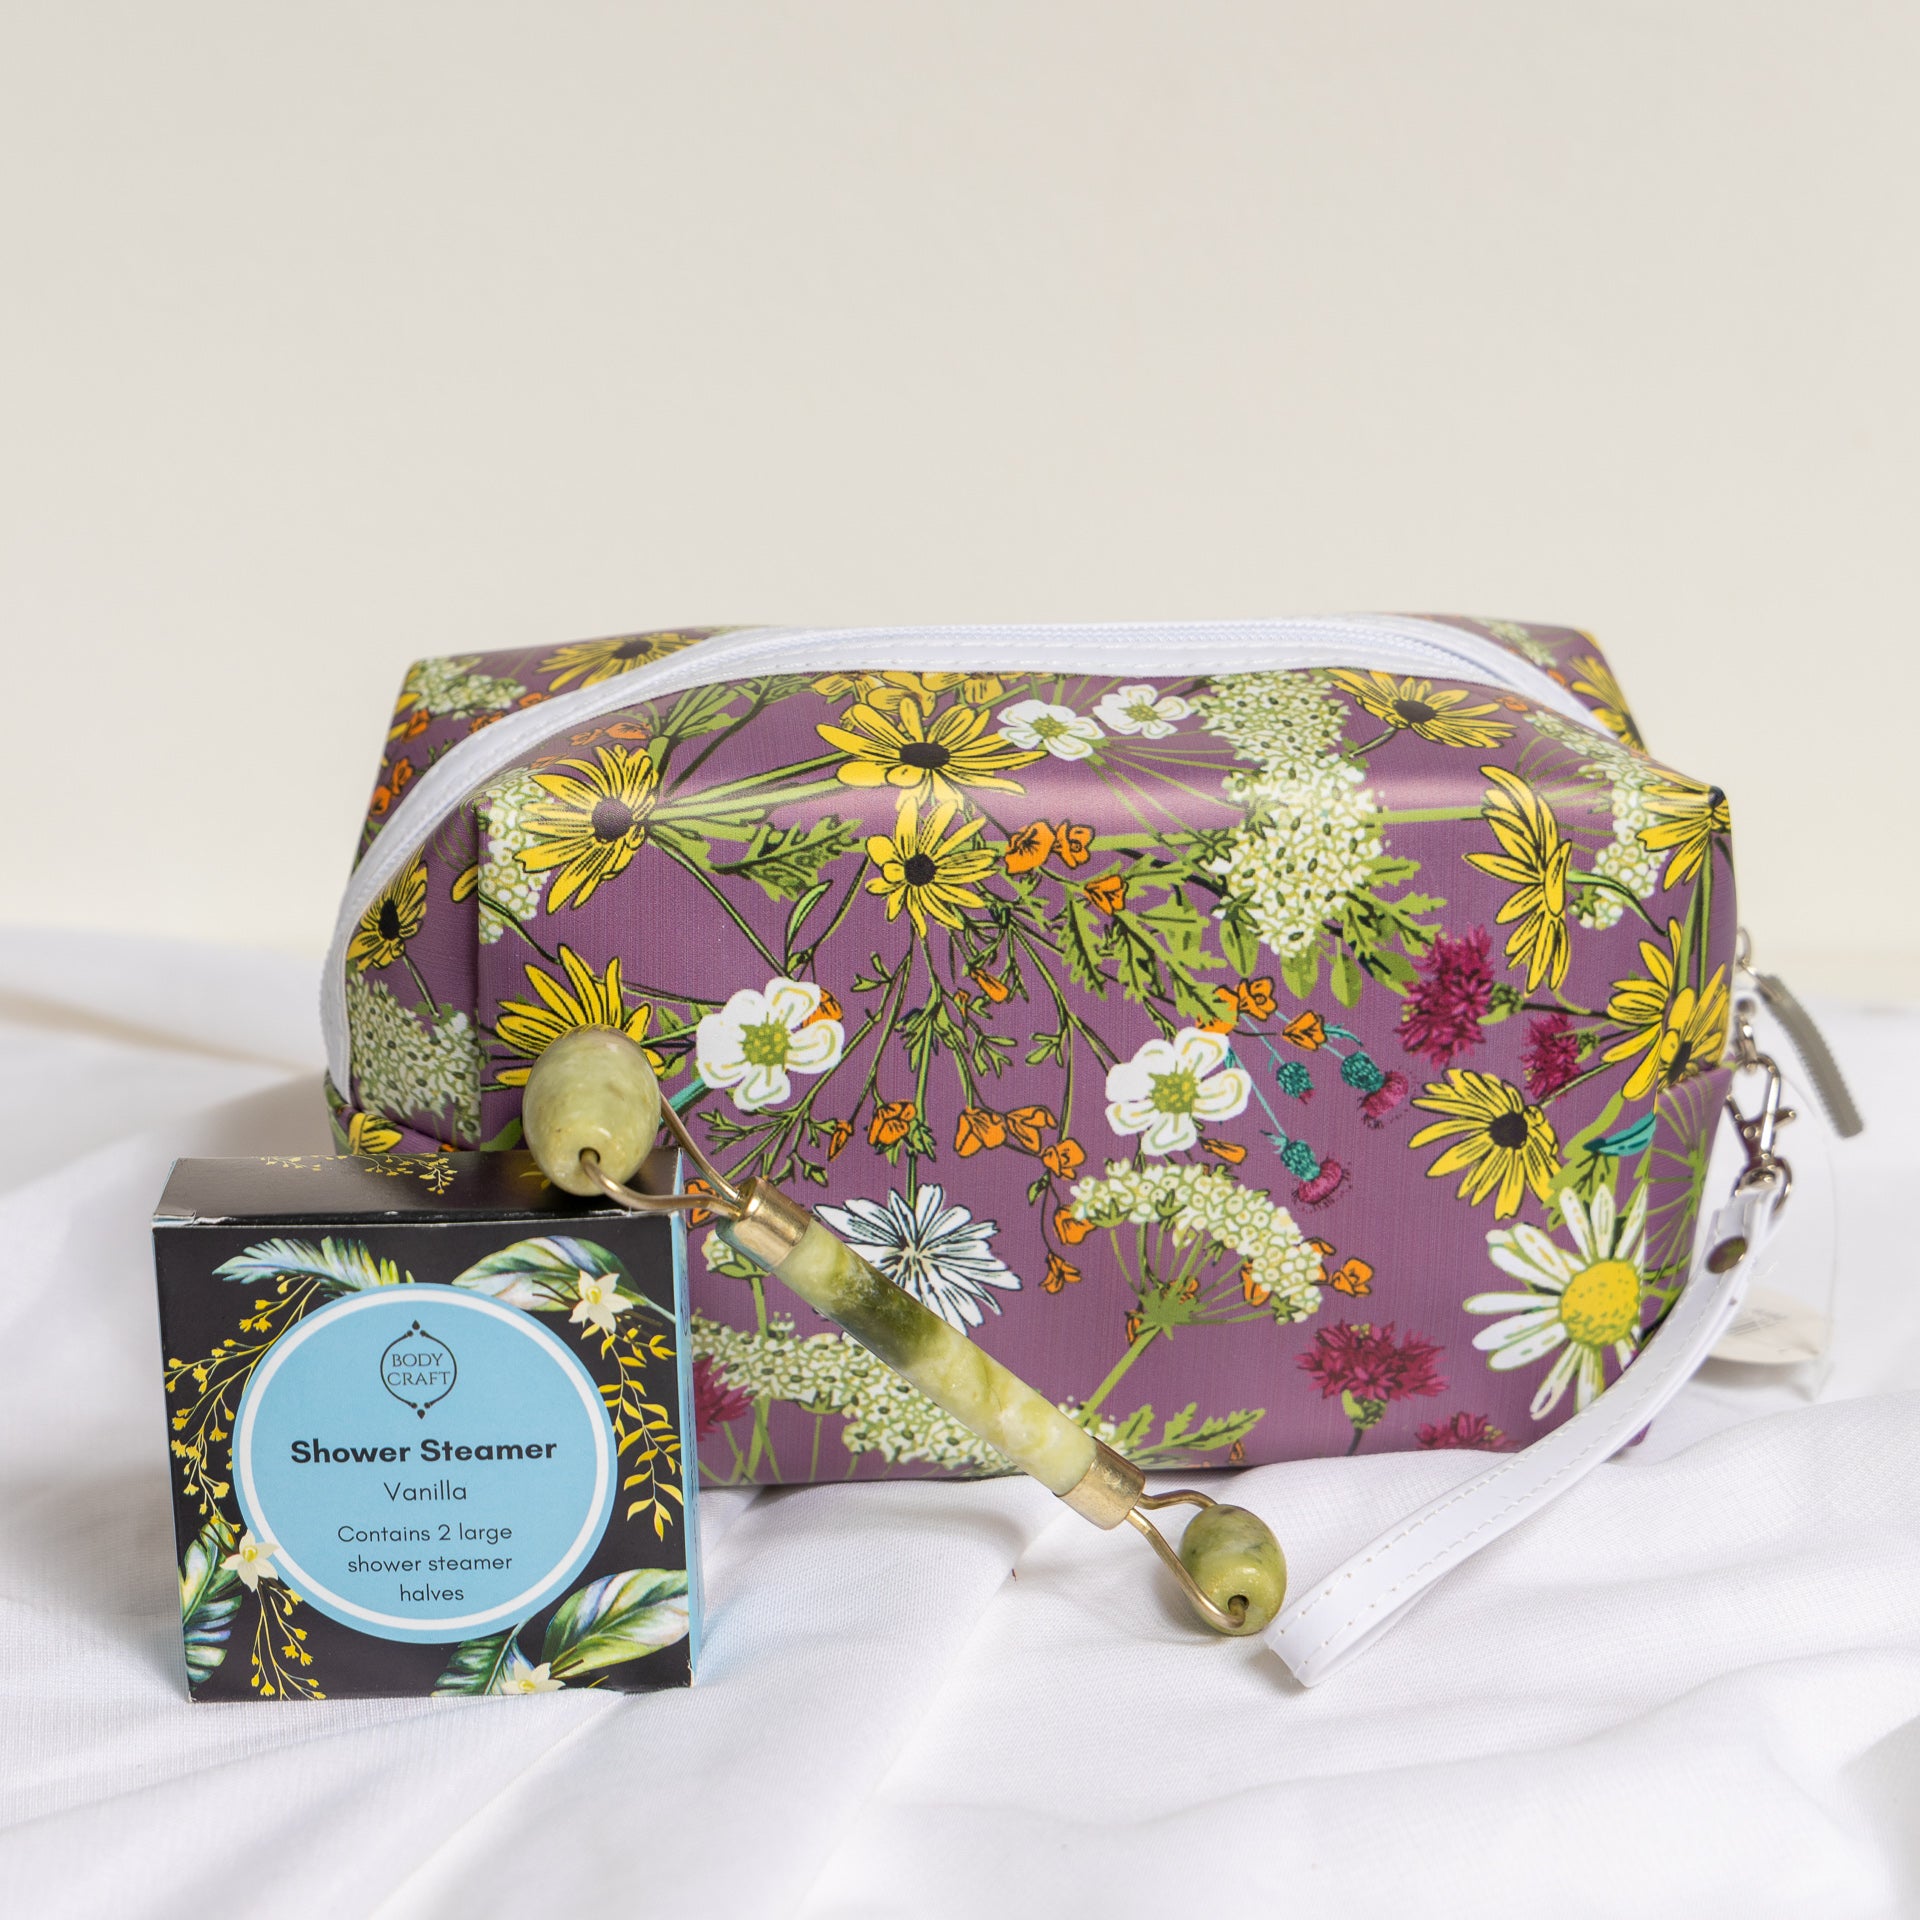 Escape to the Garden Cosmetics Bags (assorted sizes)